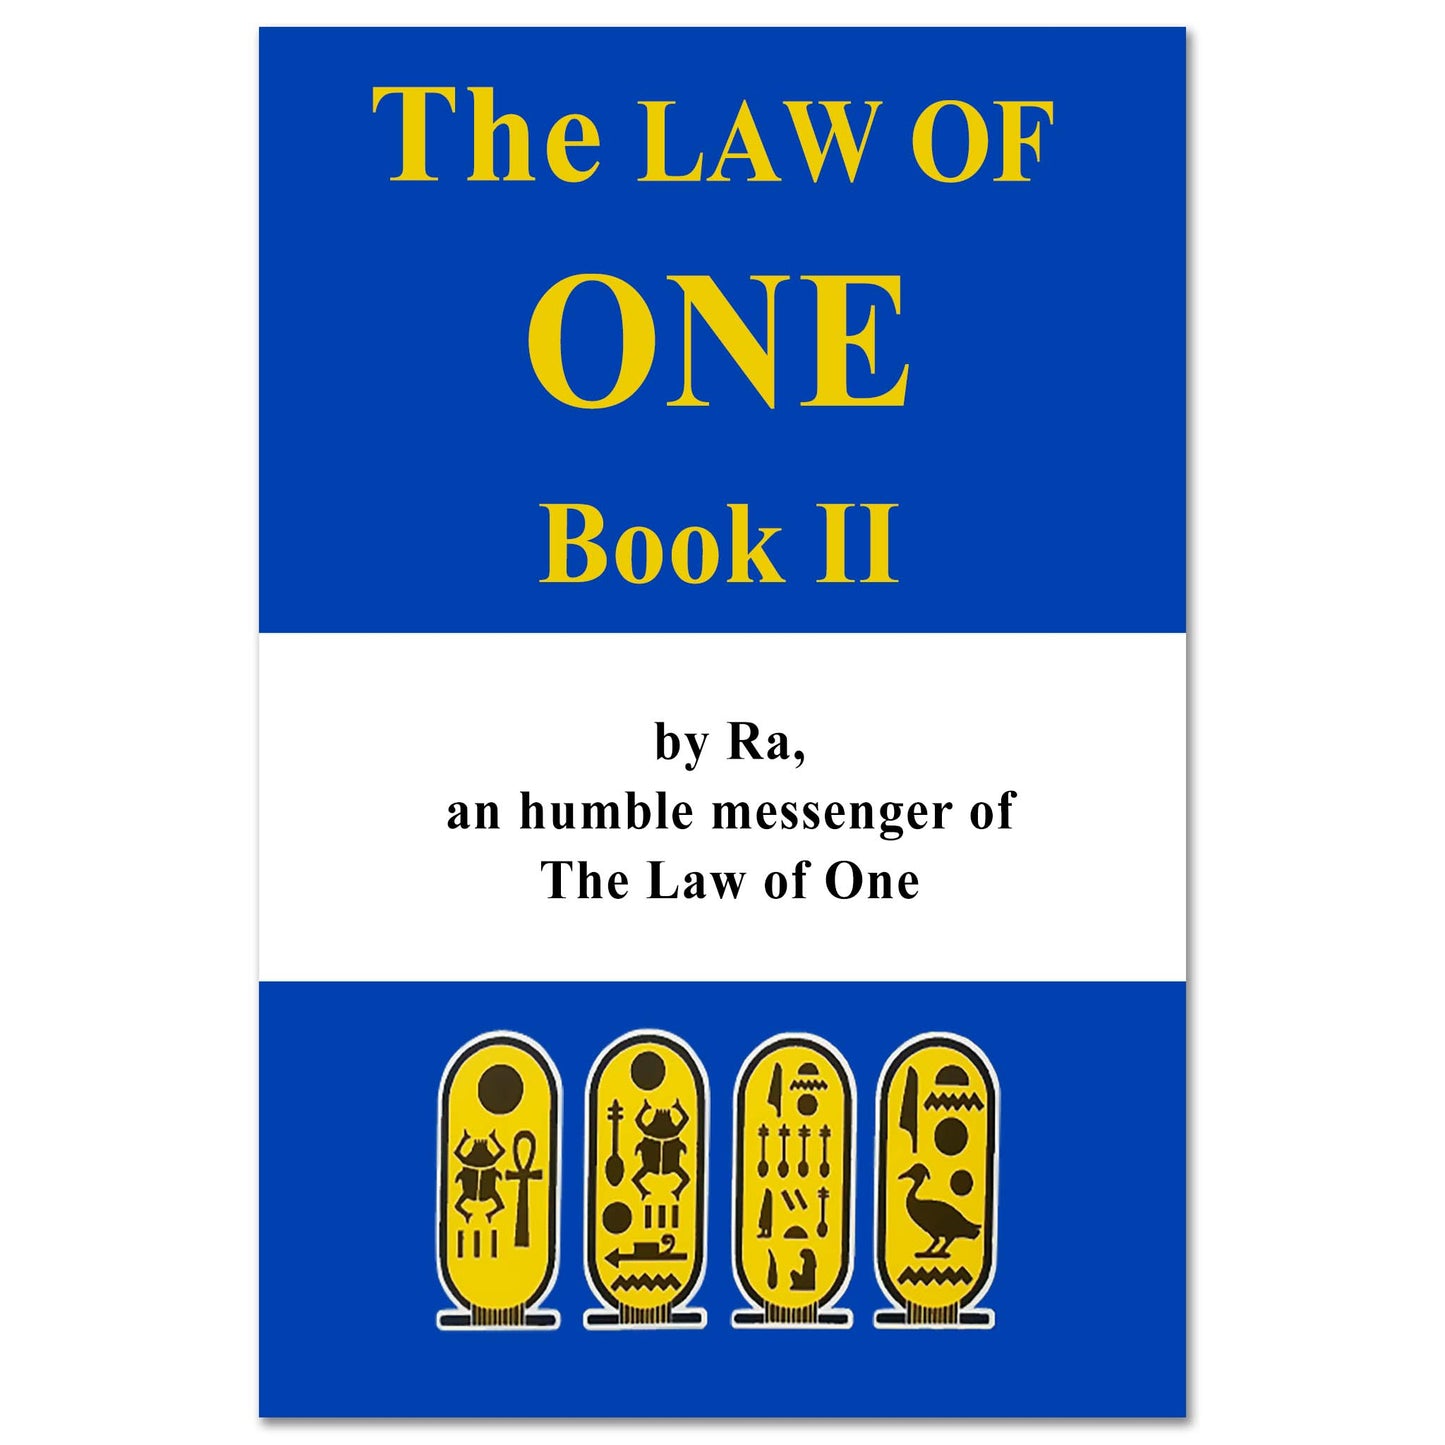 The Law of One: Book II